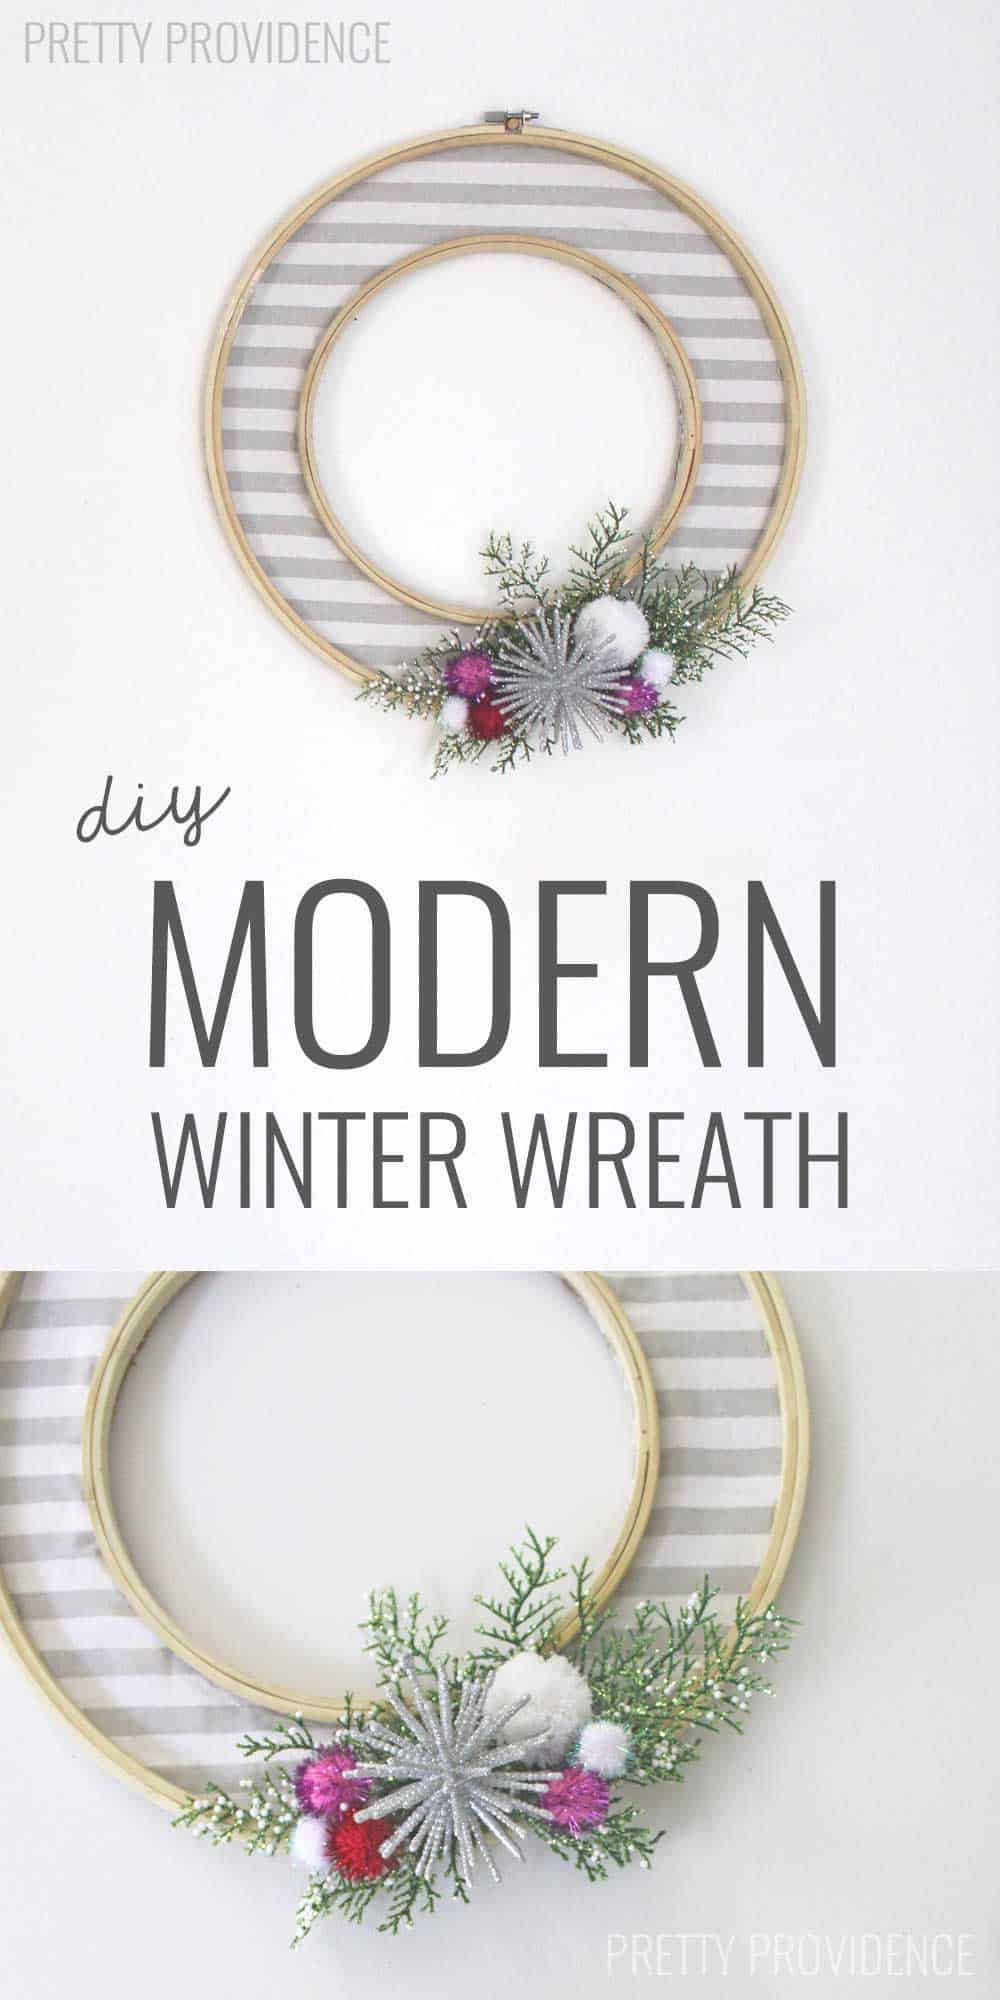 LOVE this simple, modern winter wreath!!! So pretty and festive for the winter or Christmas holidays!